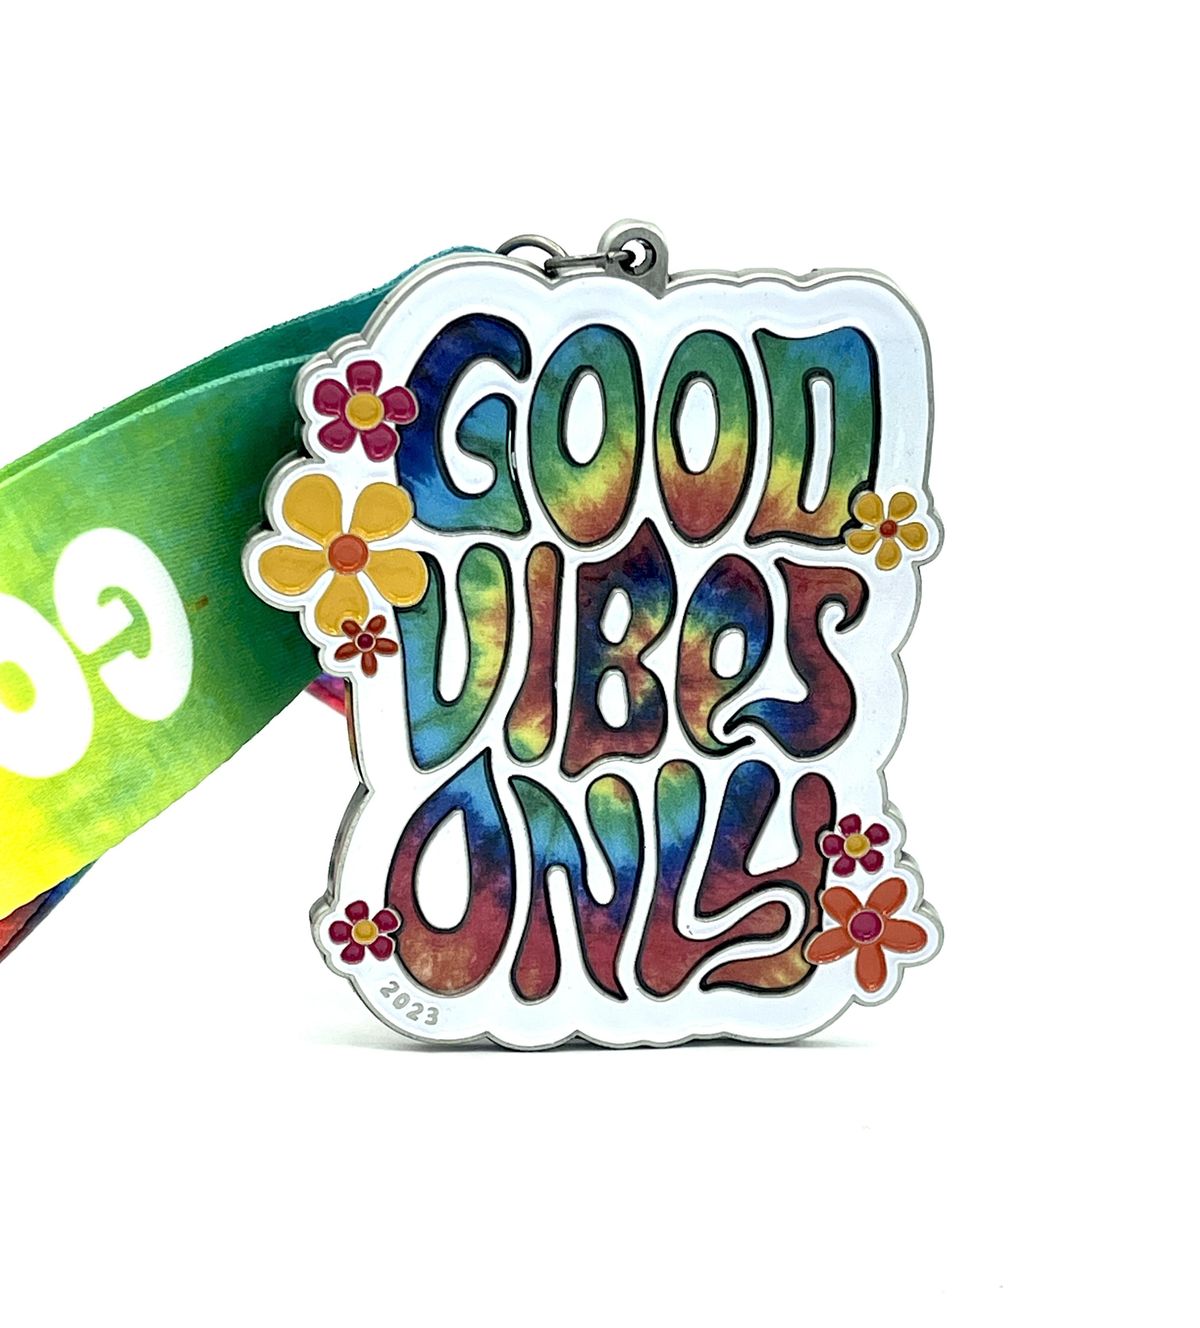 New Year: Good Vibes Only 1M 5K 10K 13.1 26.2-Save $2